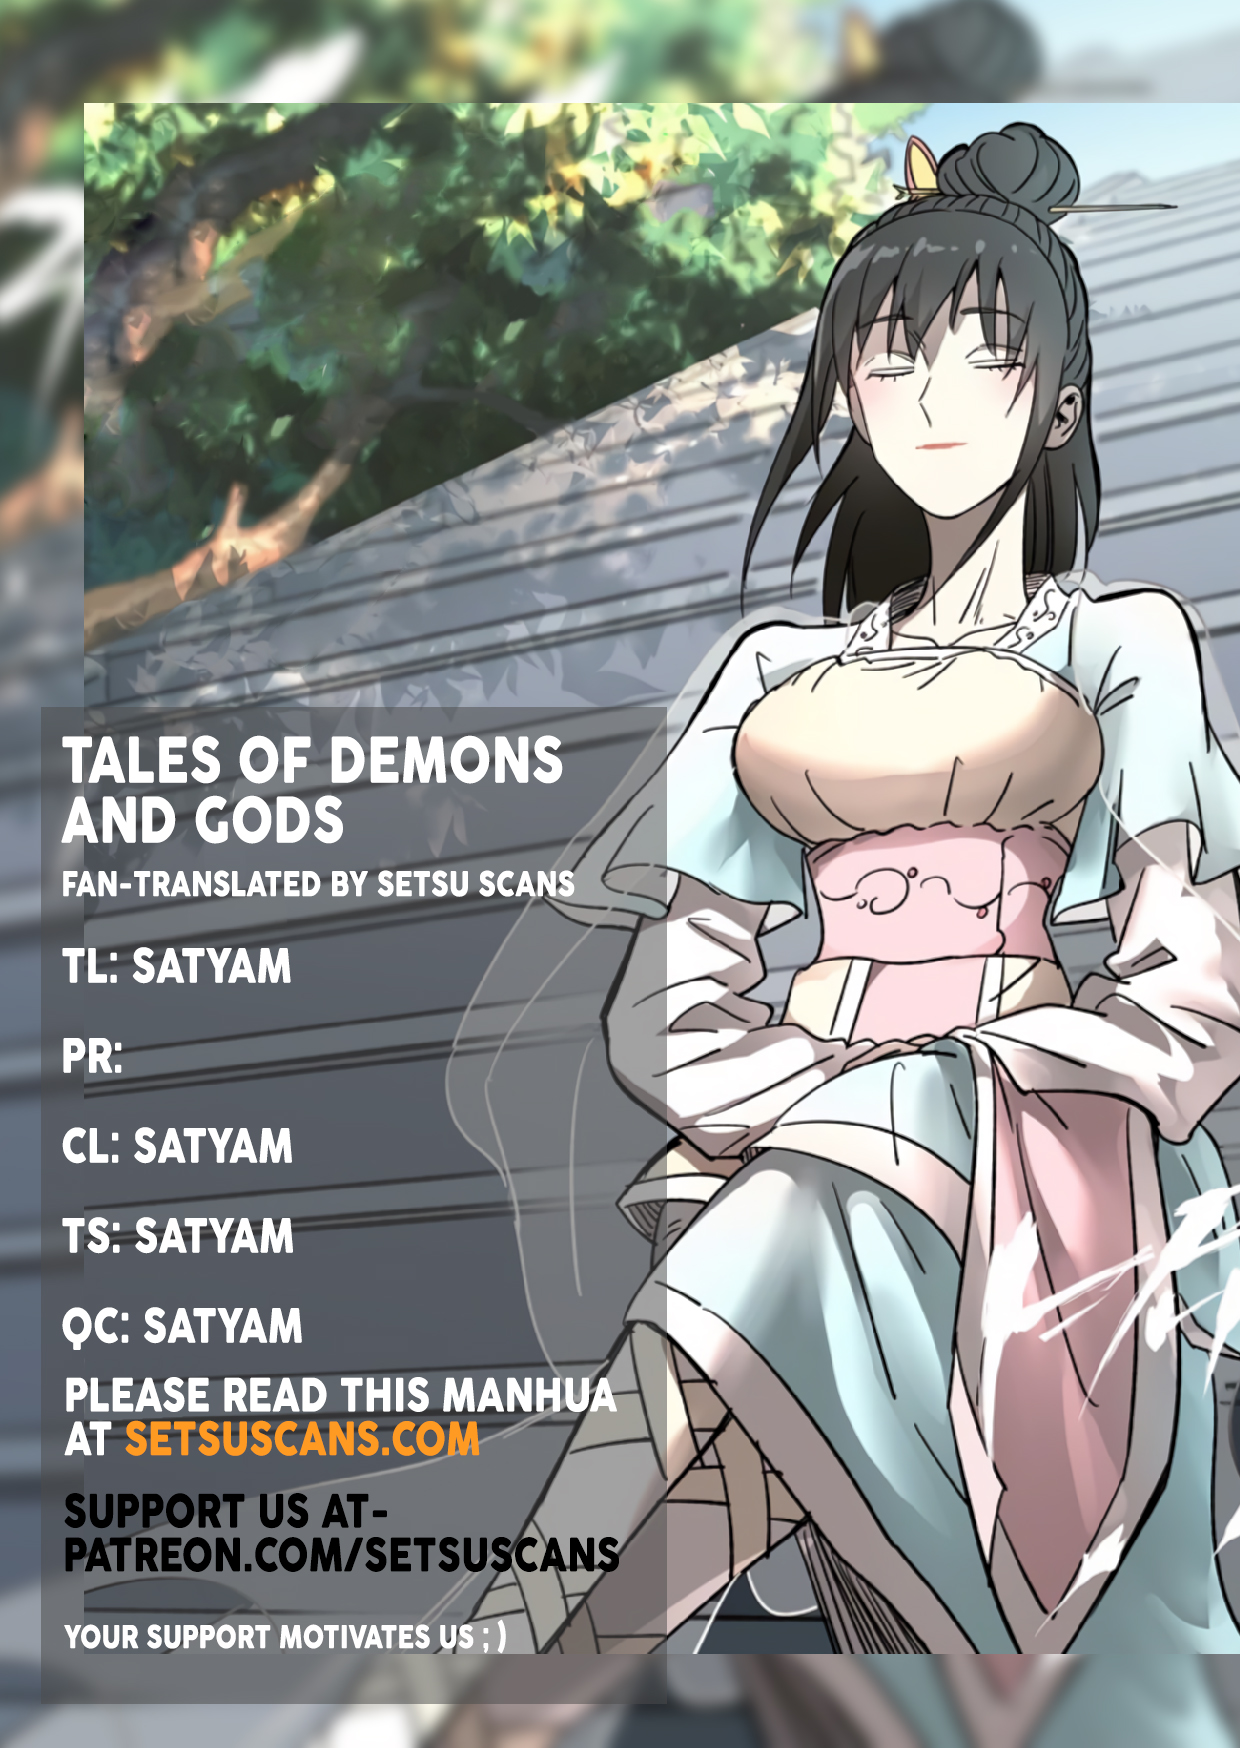 Tales of Demons and Gods - Chapter 30419 - Divine Soul Dao Art (2) - Image 1